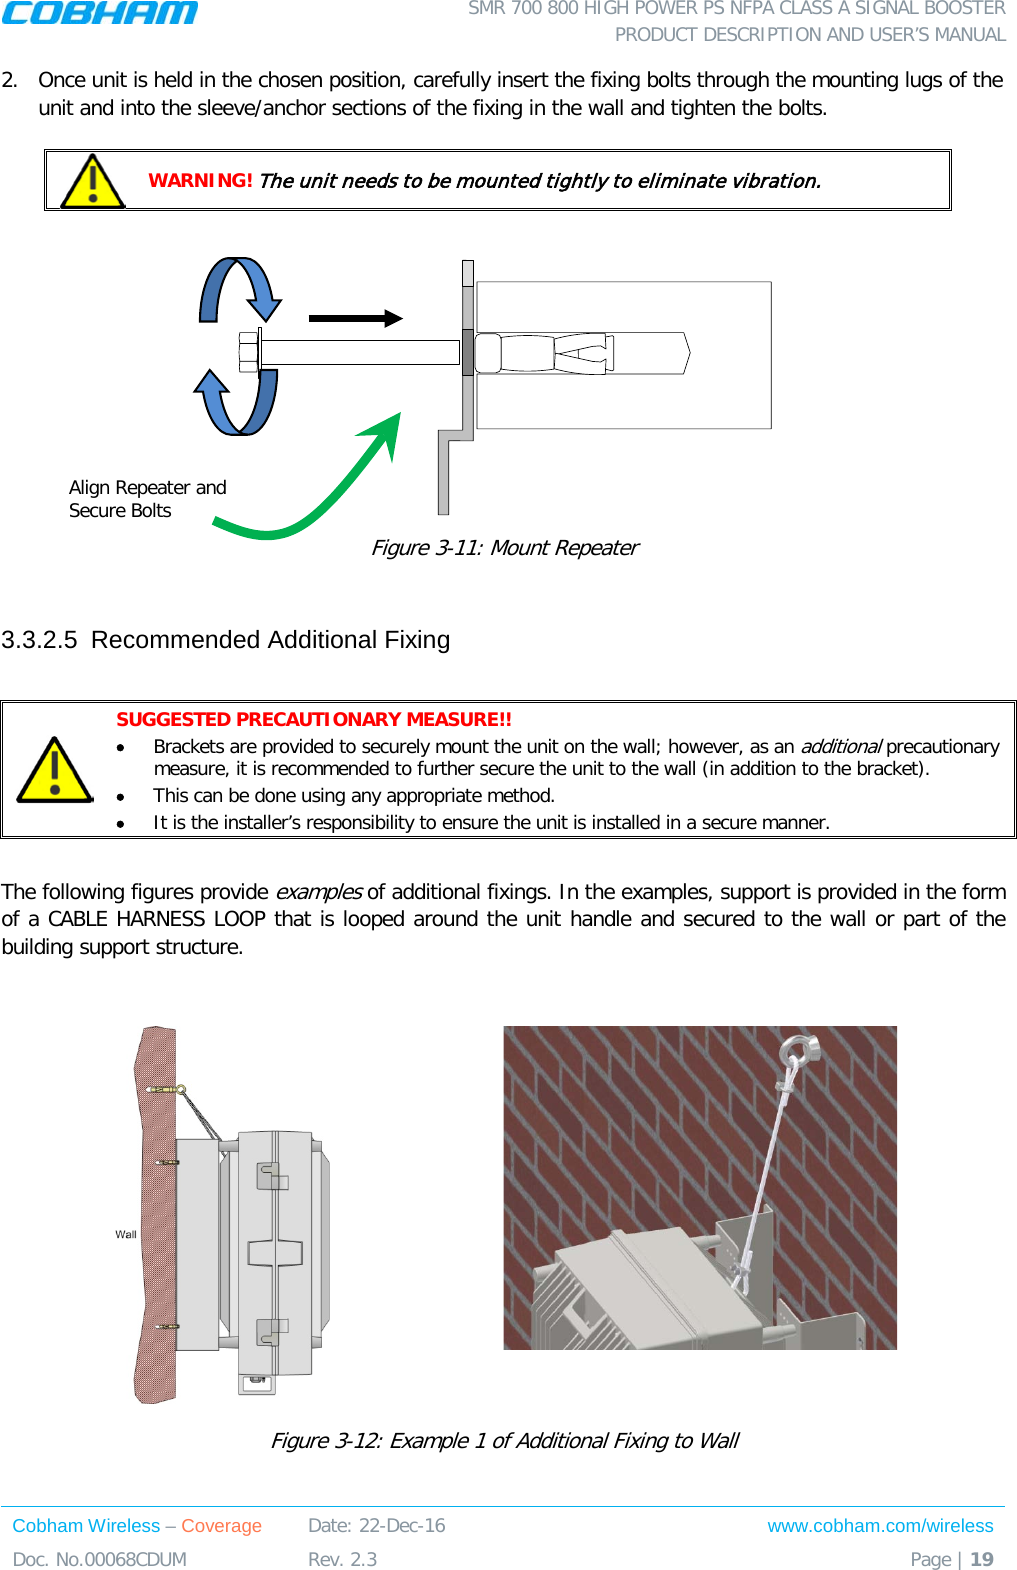  SMR 700 800 HIGH POWER PS NFPA CLASS A SIGNAL BOOSTER  PRODUCT DESCRIPTION AND USER’S MANUAL Cobham Wireless – Coverage Date: 22-Dec-16 www.cobham.com/wireless Doc. No.00068CDUM  Rev. 2.3  Page | 19  2.  Once unit is held in the chosen position, carefully insert the fixing bolts through the mounting lugs of the unit and into the sleeve/anchor sections of the fixing in the wall and tighten the bolts.    WARNING! The unit needs to be mounted tightly to eliminate vibration.   Figure  3-11: Mount Repeater   3.3.2.5  Recommended Additional Fixing   SUGGESTED PRECAUTIONARY MEASURE!! • Brackets are provided to securely mount the unit on the wall; however, as an additional precautionary measure, it is recommended to further secure the unit to the wall (in addition to the bracket).  • This can be done using any appropriate method. • It is the installer’s responsibility to ensure the unit is installed in a secure manner.   The following figures provide examples of additional fixings. In the examples, support is provided in the form of a CABLE HARNESS LOOP that is looped around the unit handle and secured to the wall or part of the building support structure.    Figure  3-12: Example 1 of Additional Fixing to Wall Align Repeater and Secure Bolts 